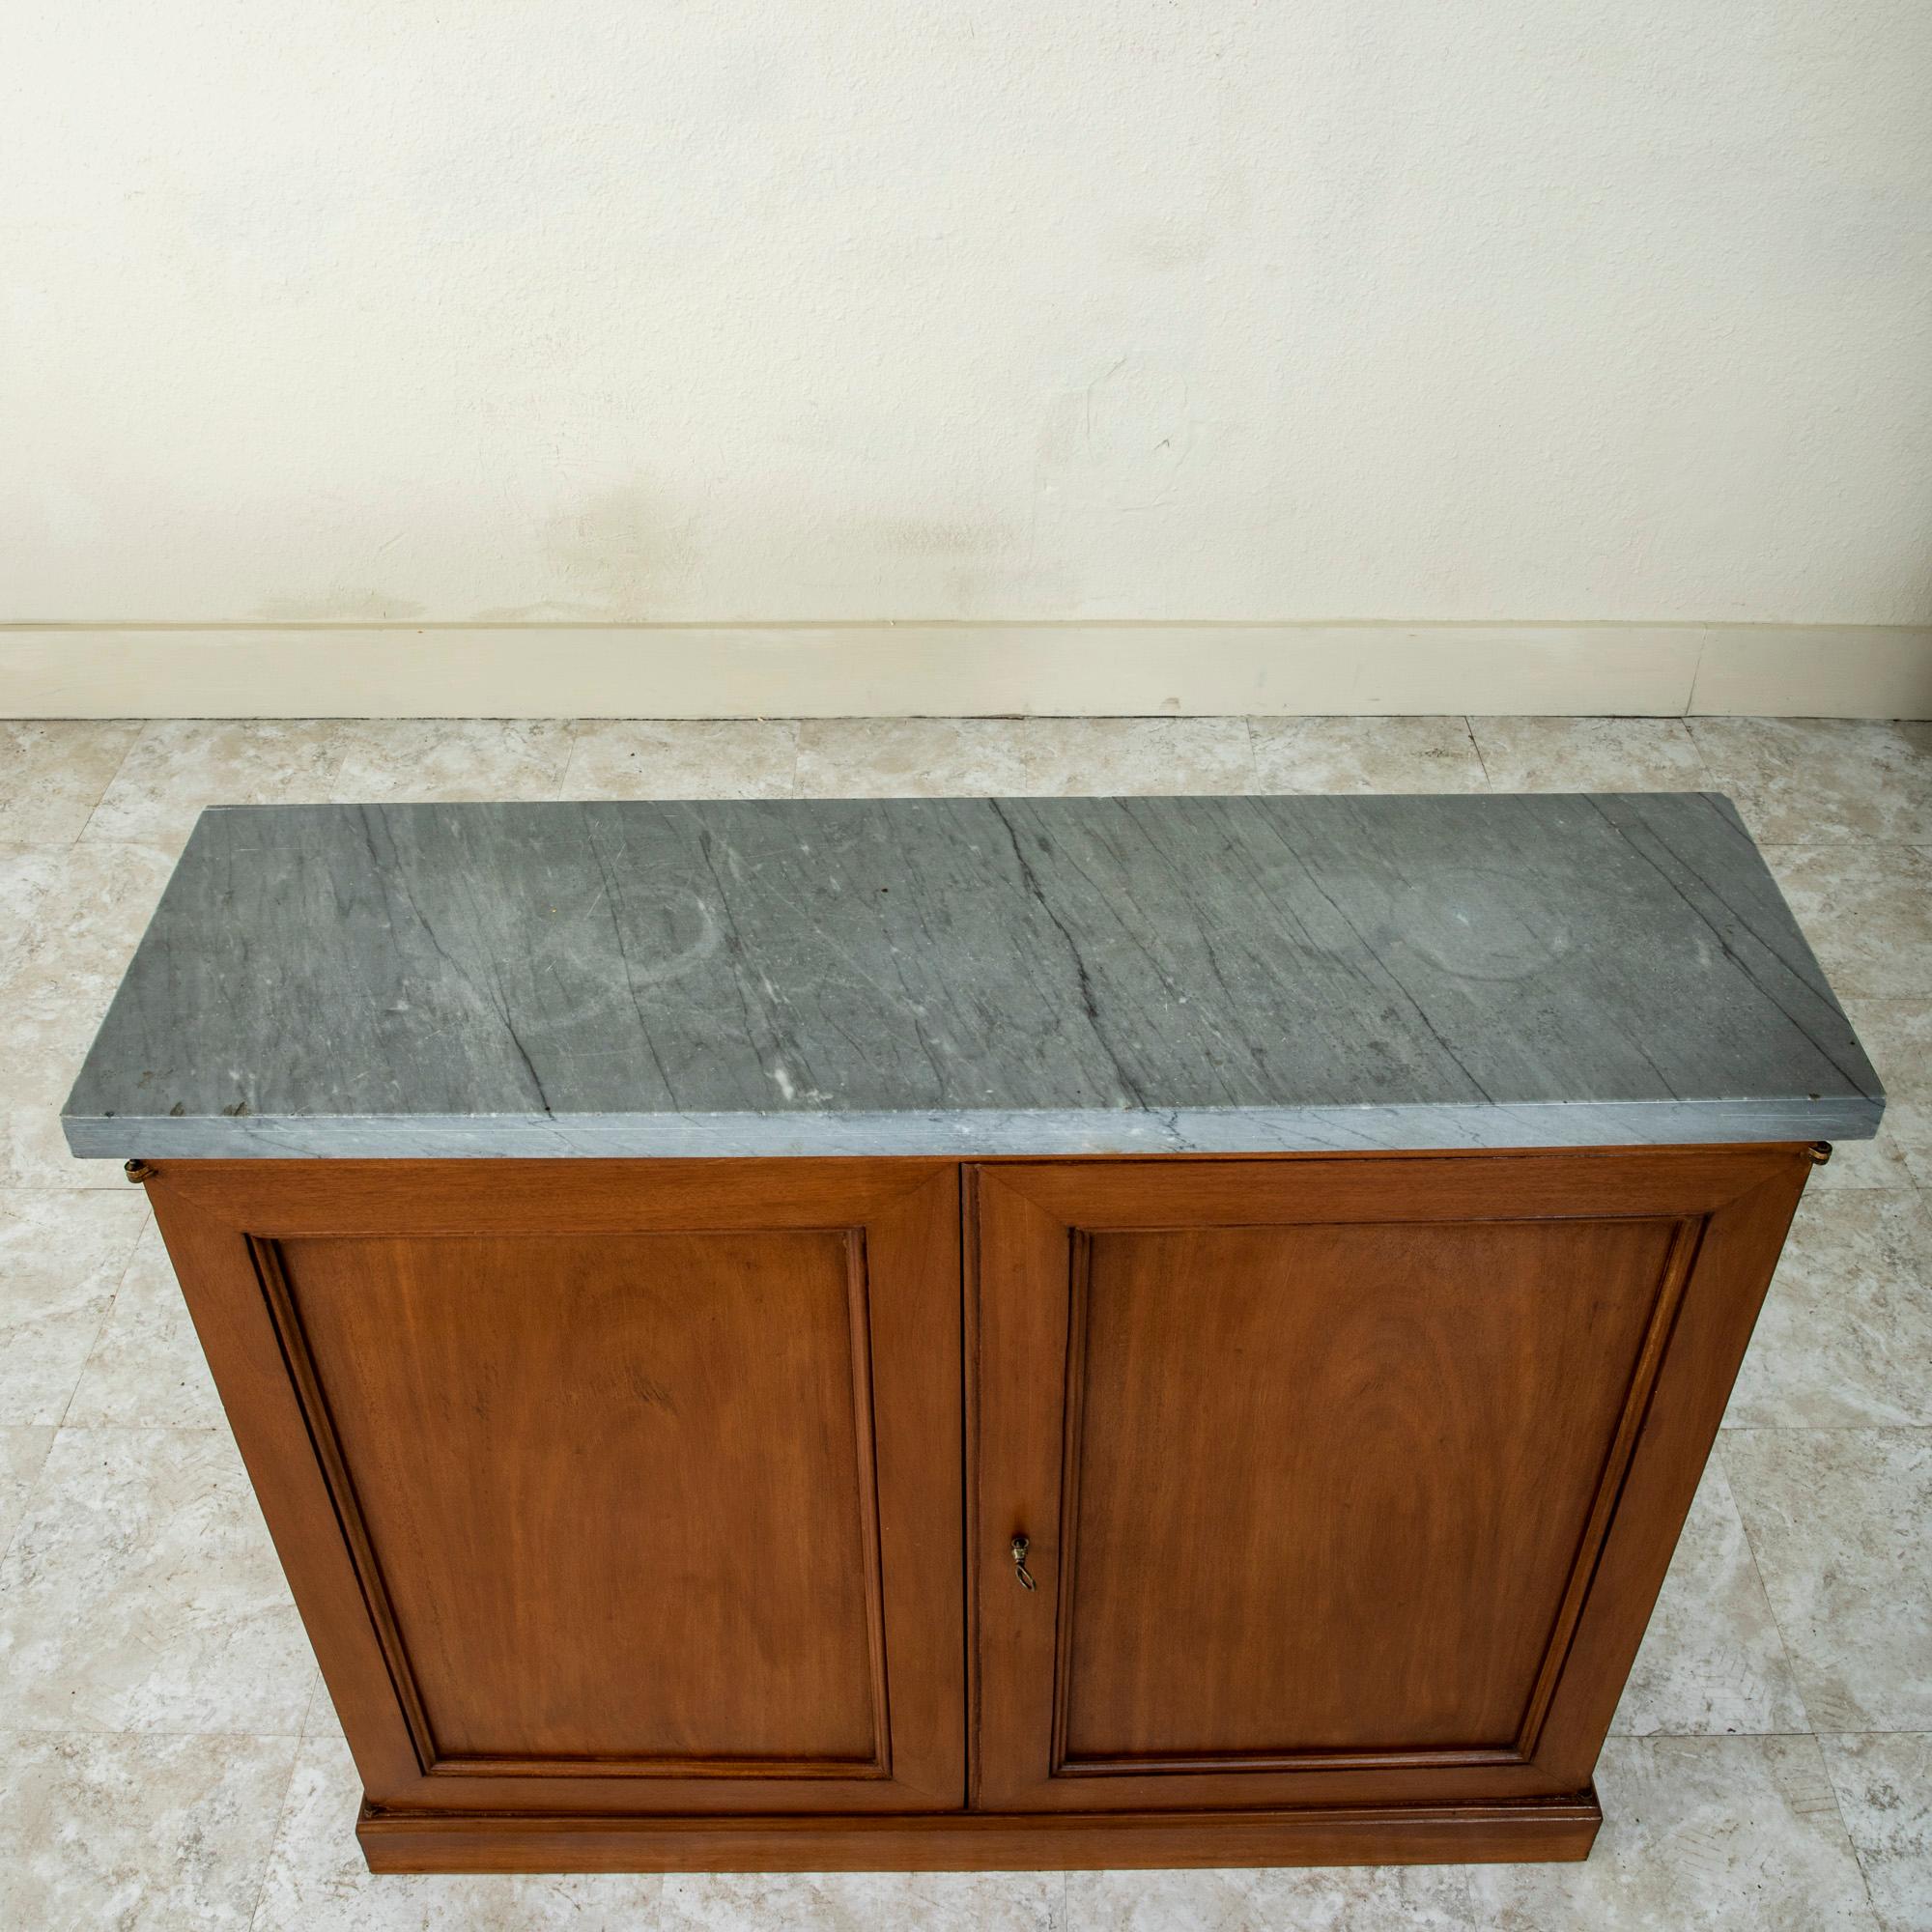 Pair of Mid-20th Century French Mahogany Console Cabinets with Grey Marble Tops For Sale 10